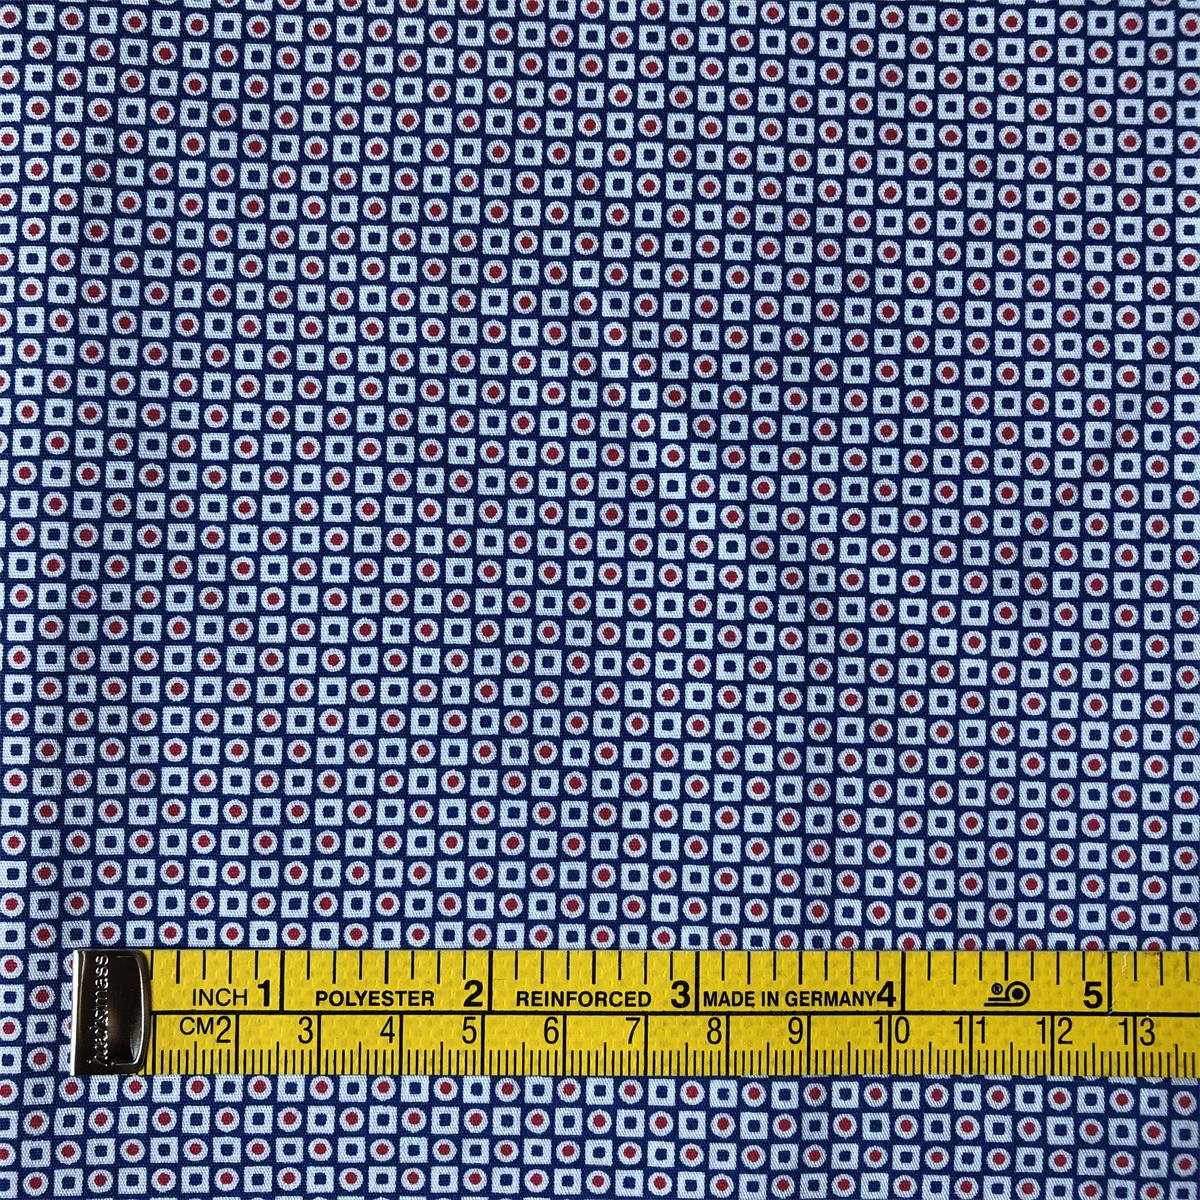 Sun-rising Textile Cotton fabric hot sale high quality soft 100% cotton poplin printed fabric for men's shirts